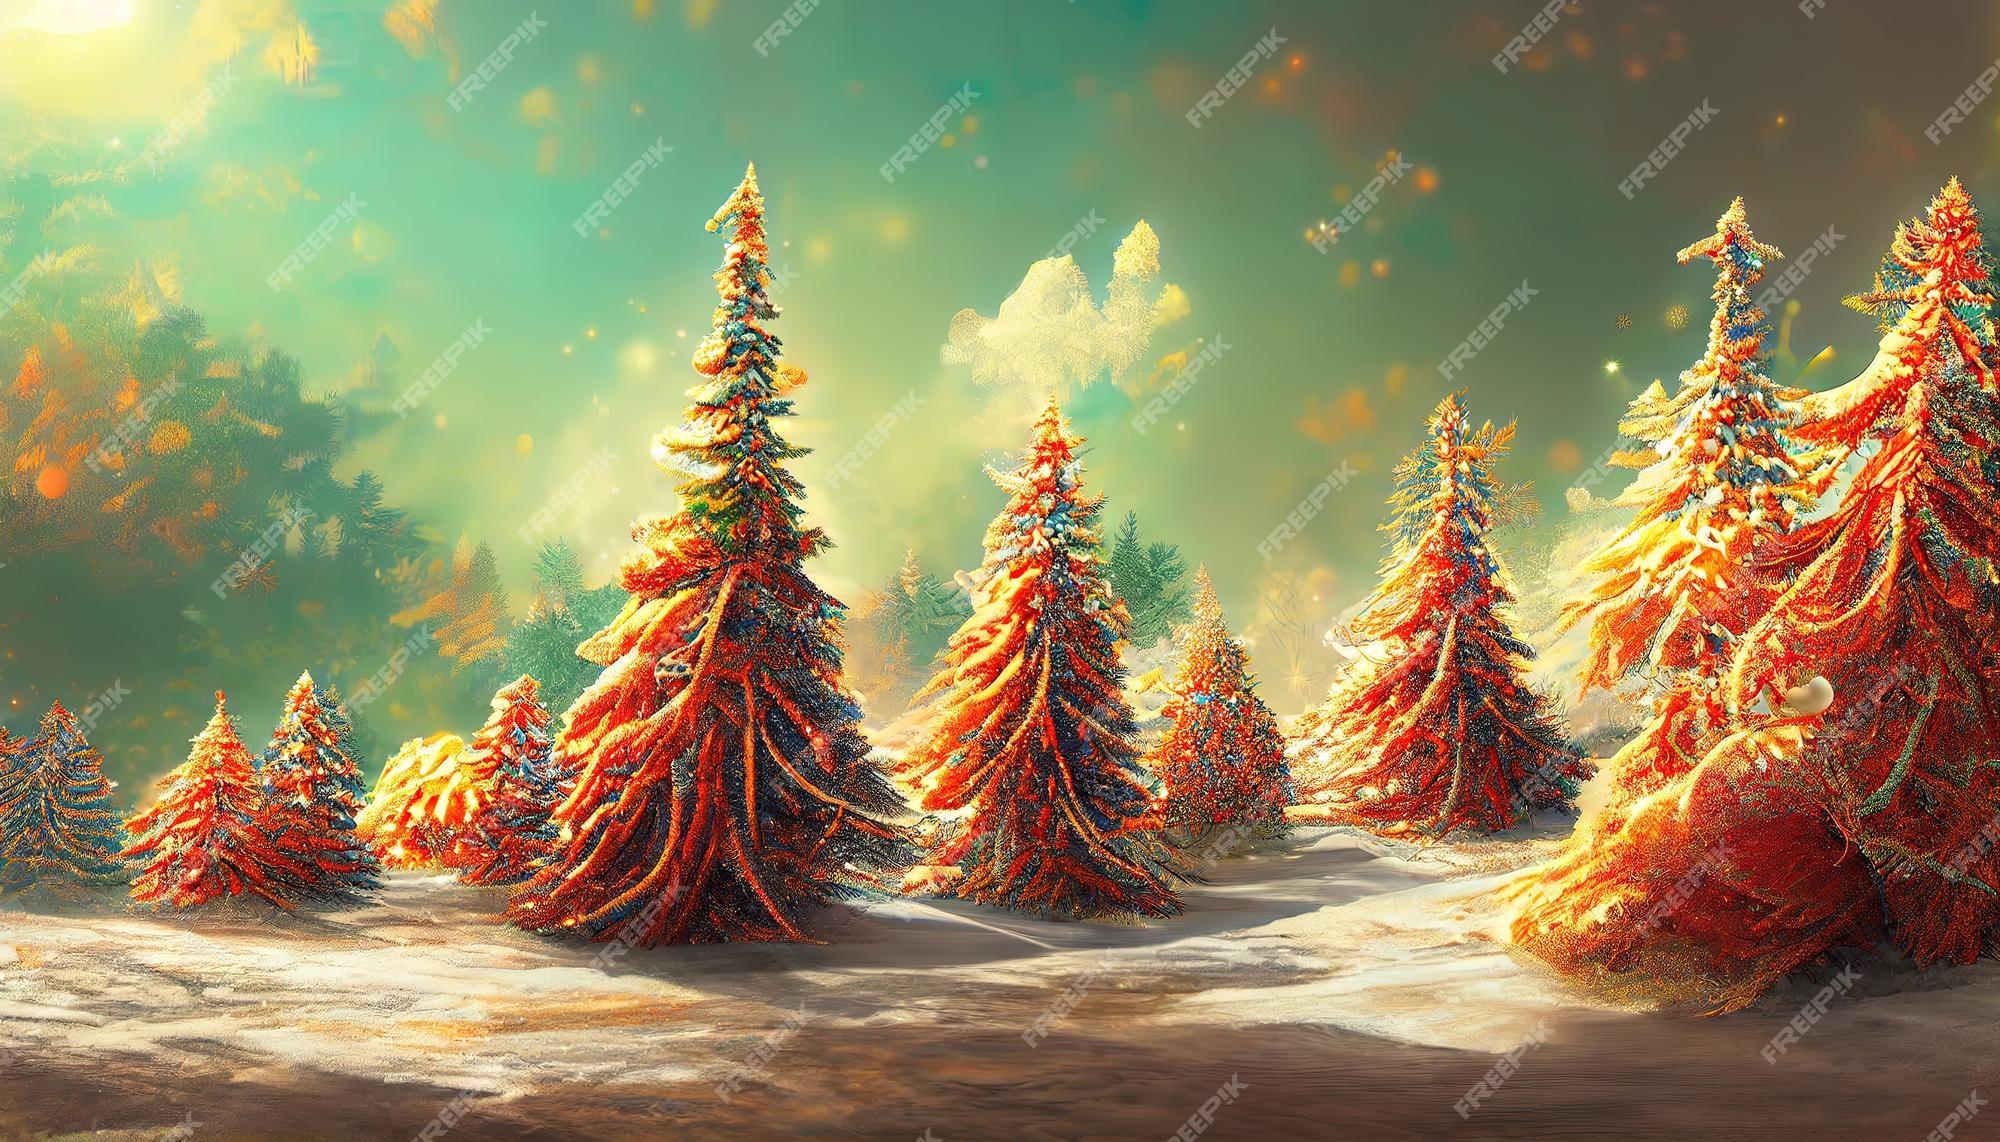 Premium Photo Decorated Christmas Trees In Winter Forest As